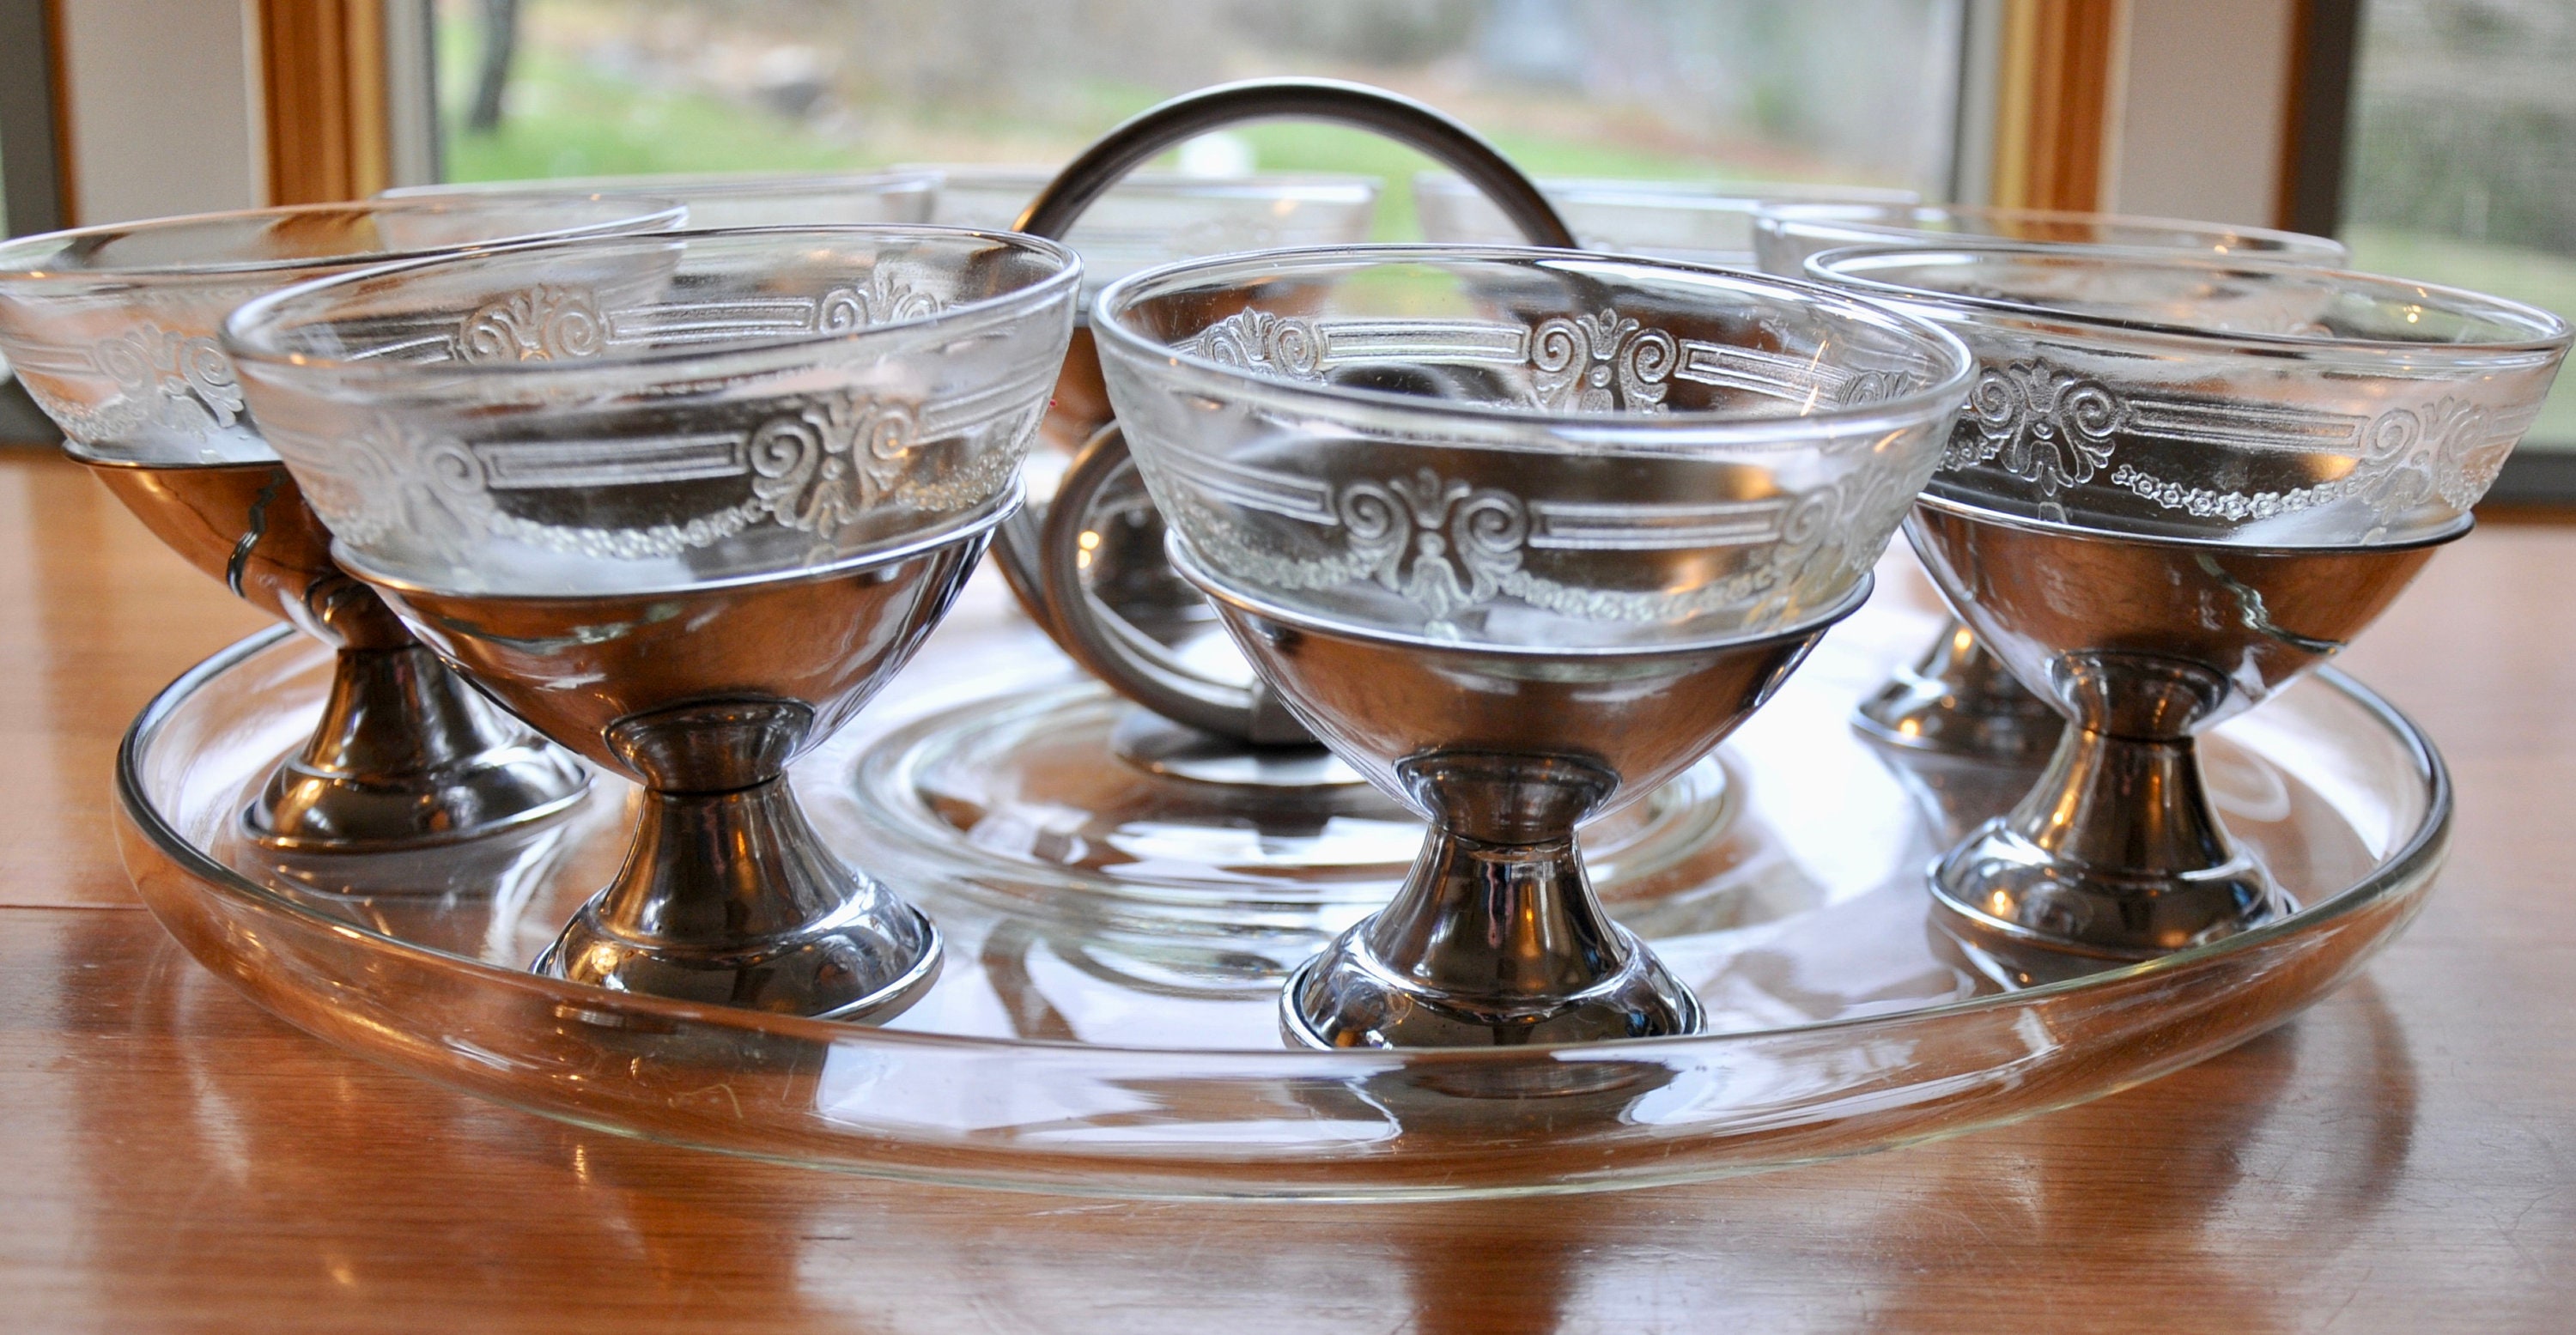 Ice Cream social serving set Ice cream bowls with serving platter Antique Glass Serving Tray with 8 chrome and glass ice cream bowls